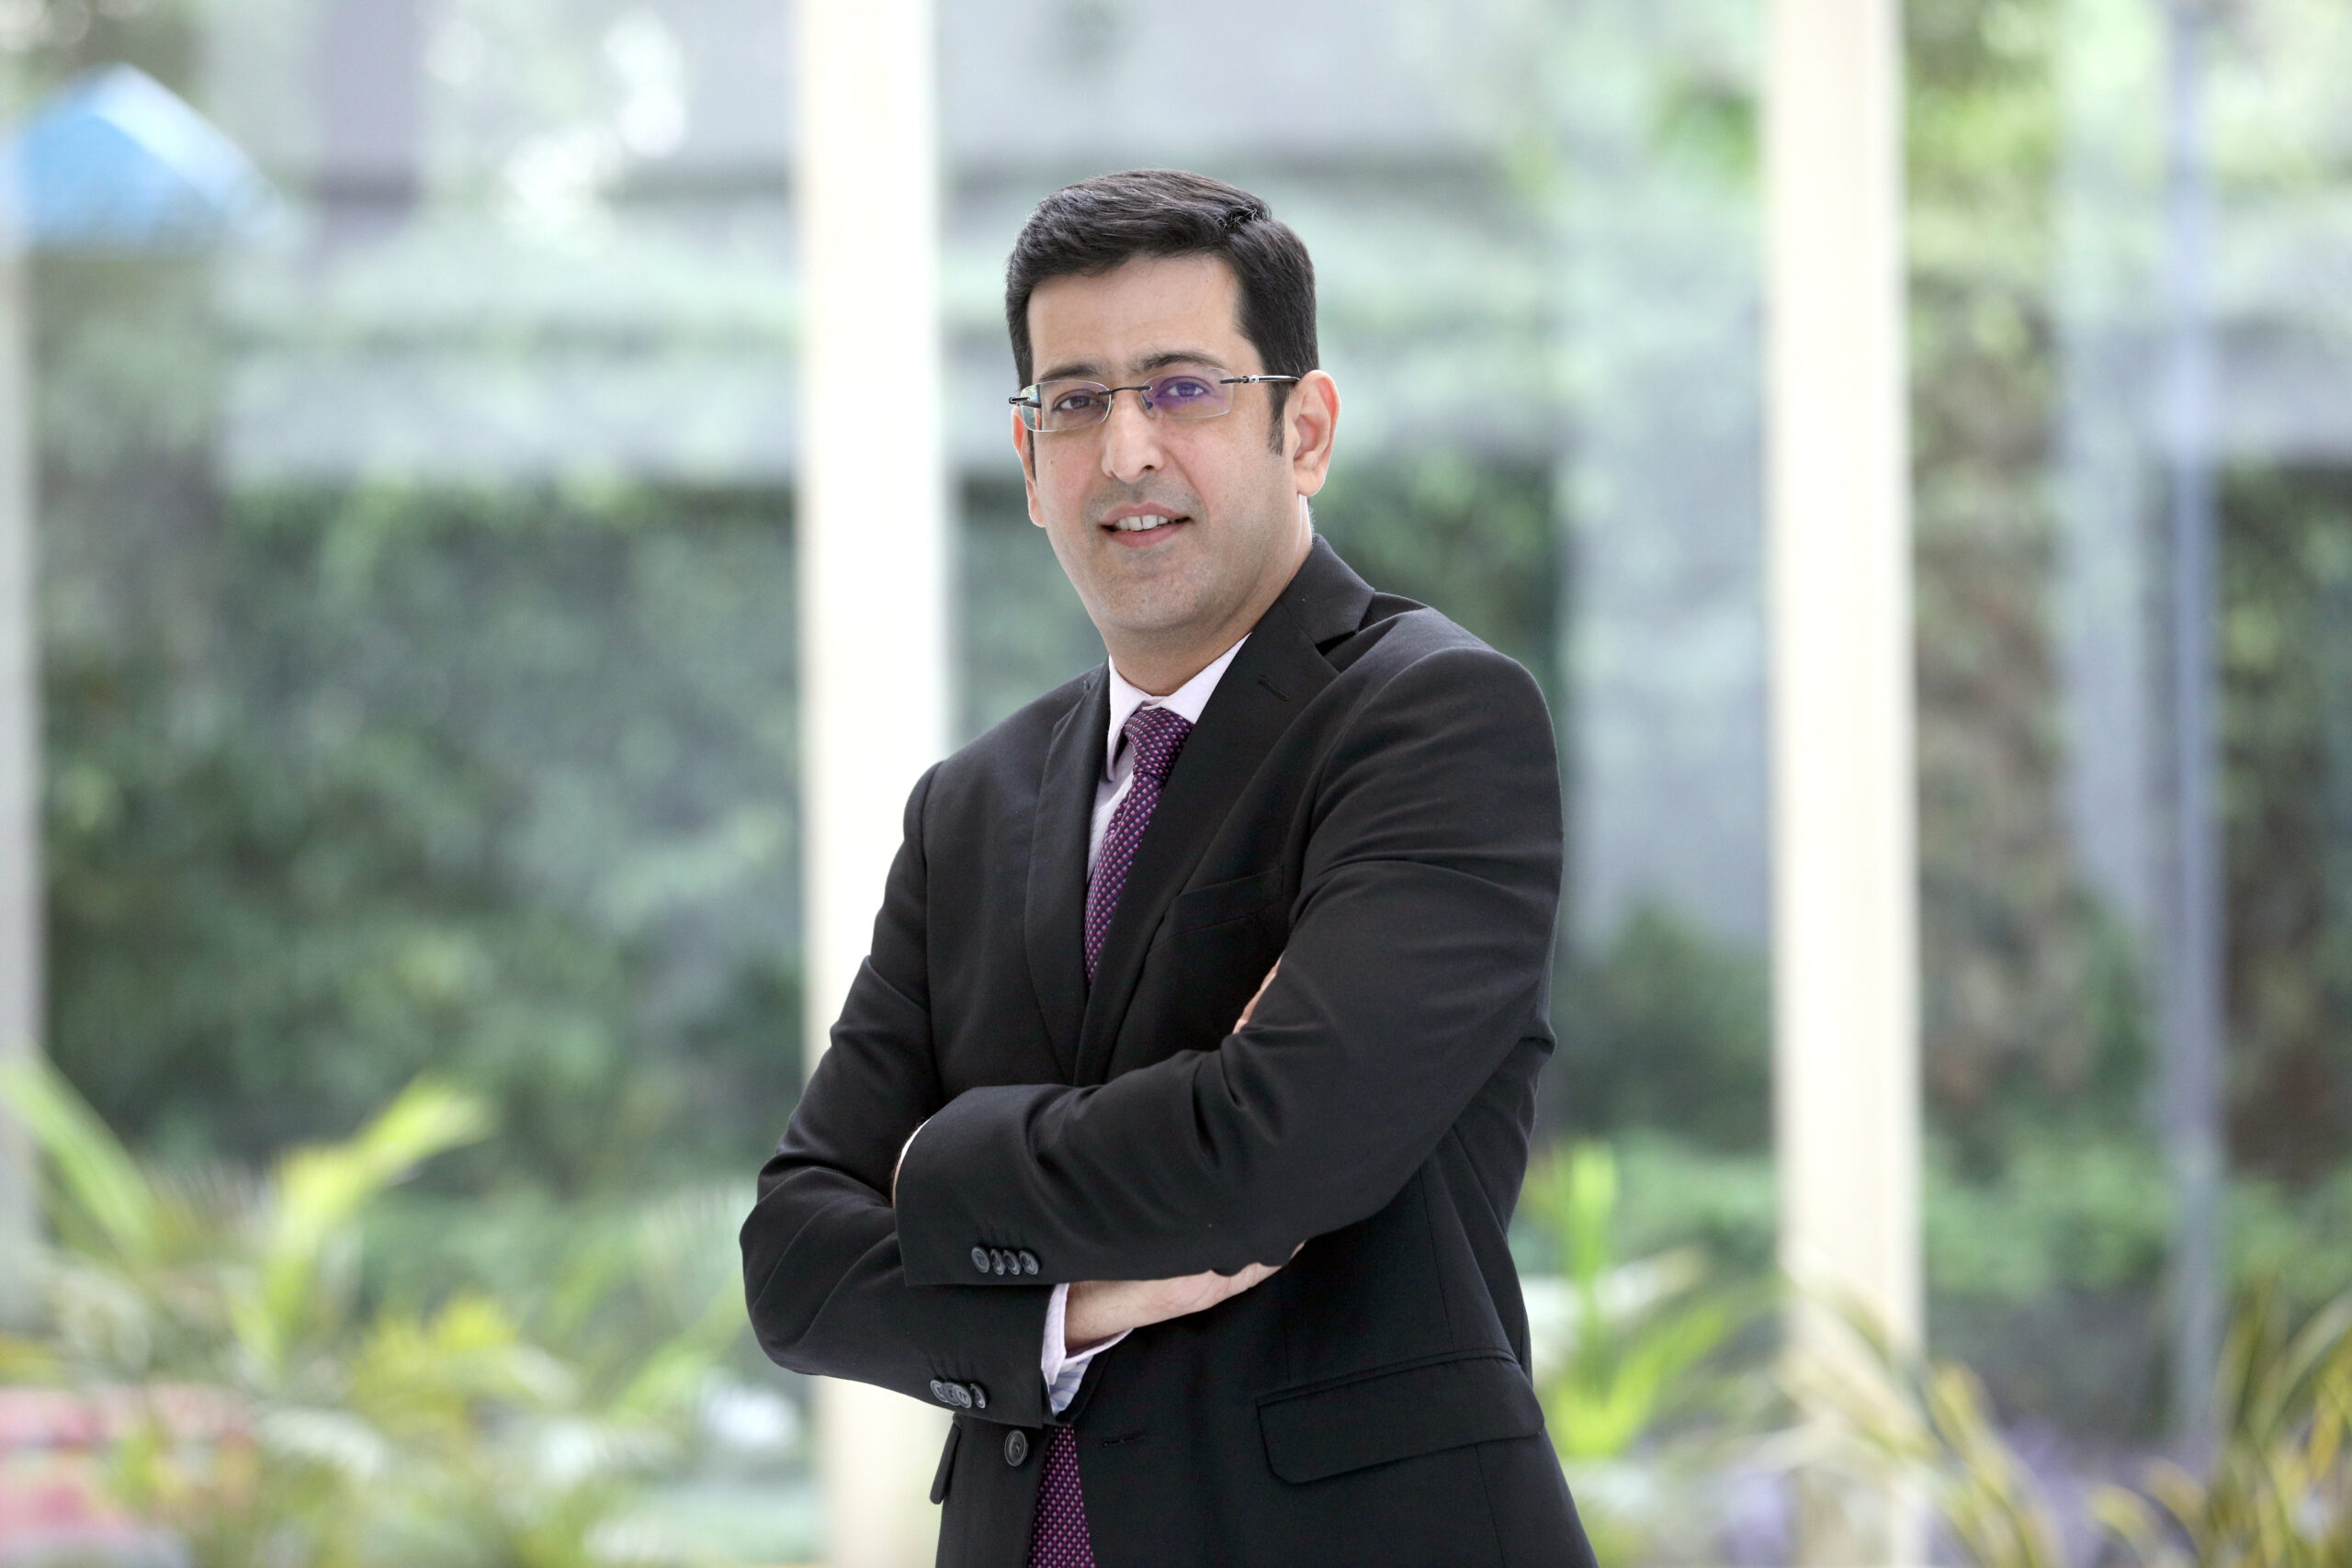 Malaysia Airlines promotes Amit Mehta as Regional Manager- South Asia, Middle East, and Africa